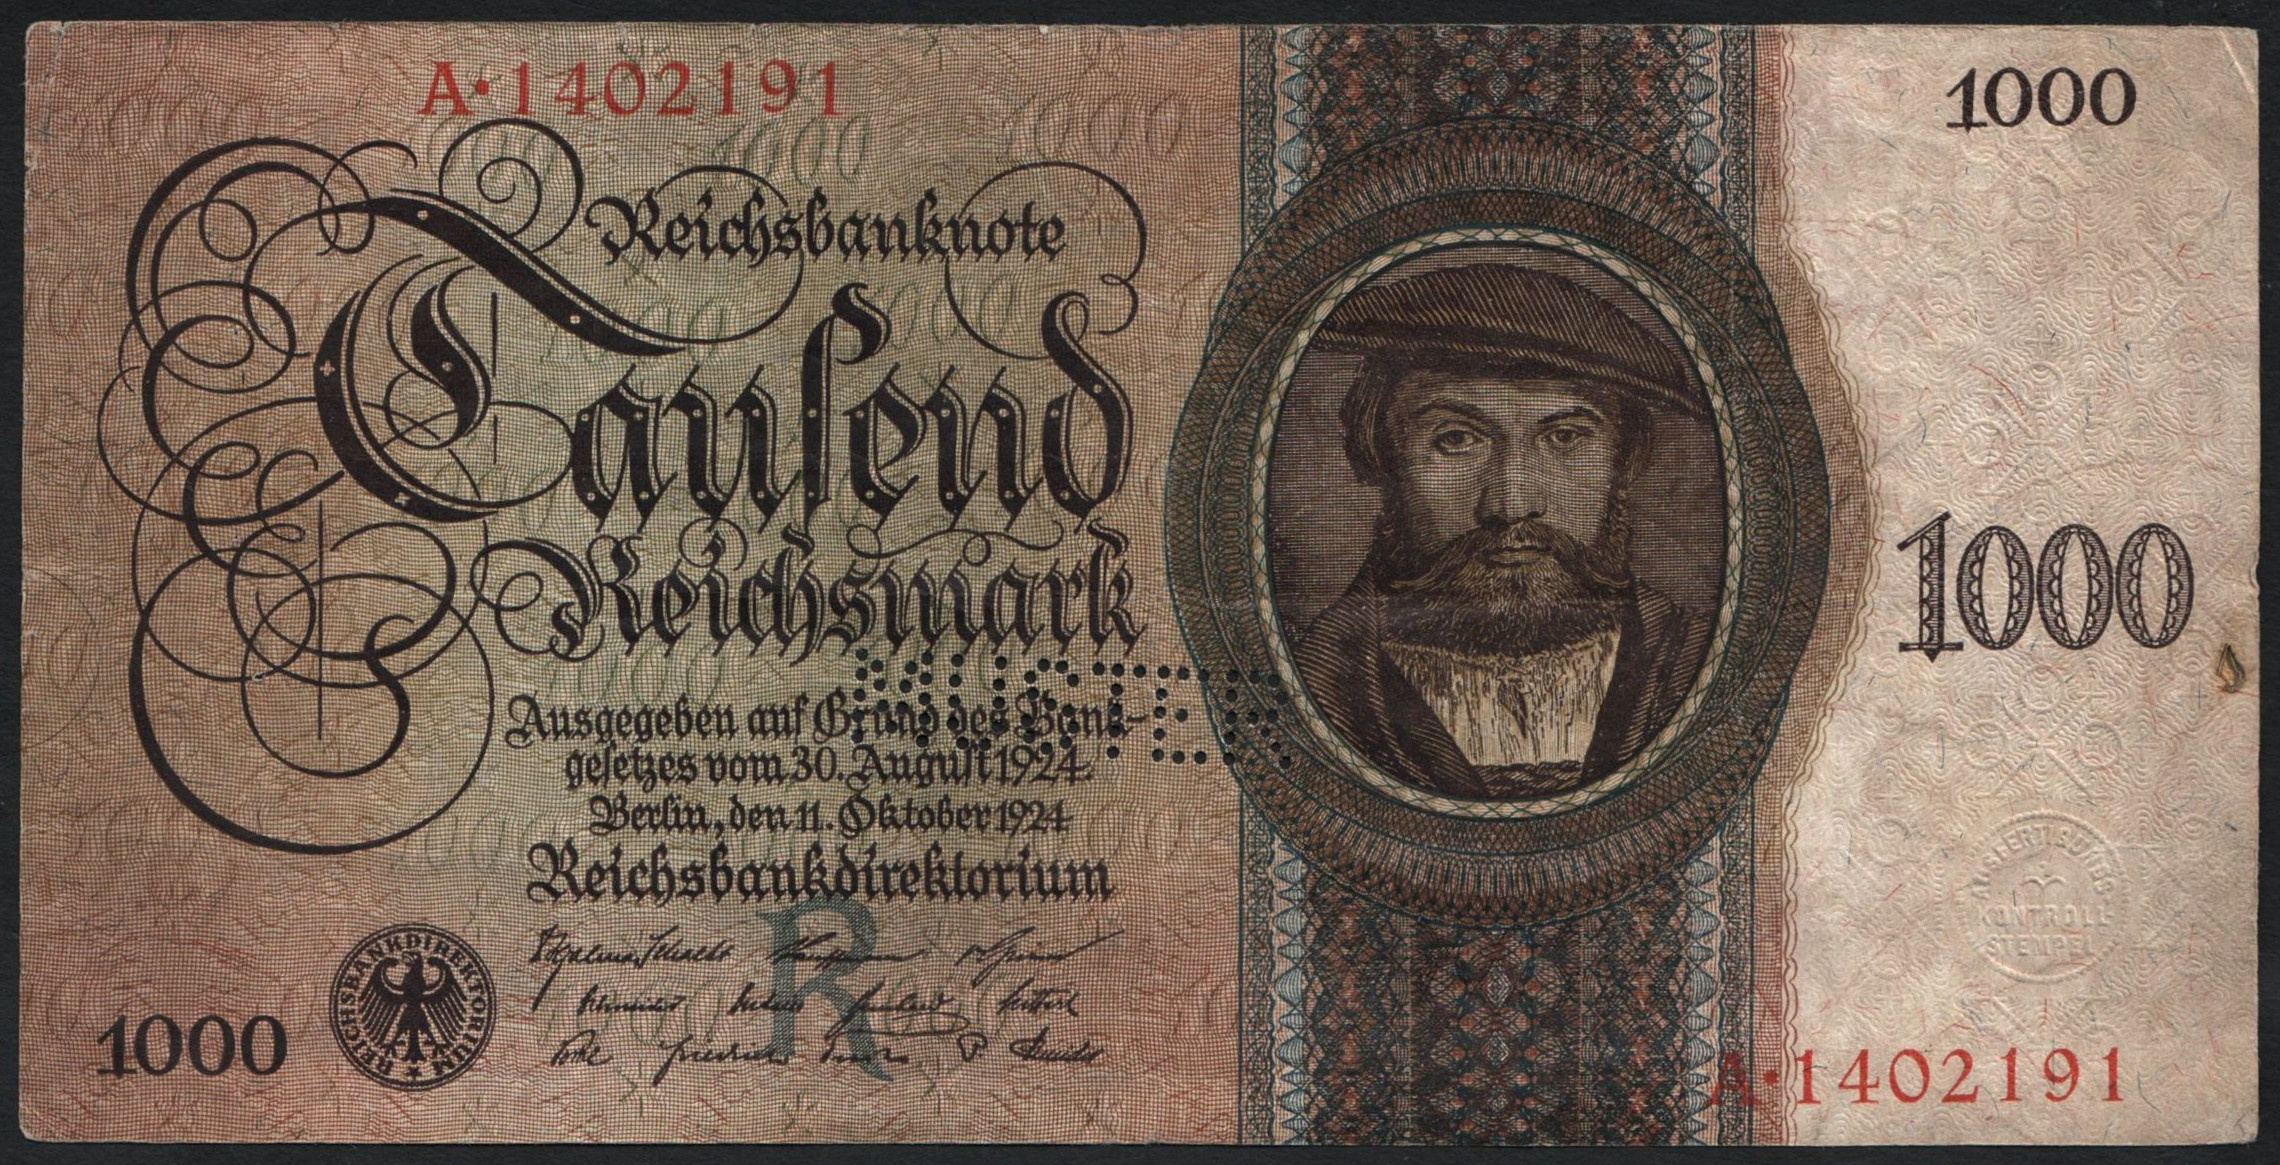 1000 Reichsmark, 1924, R/A, MUSTER